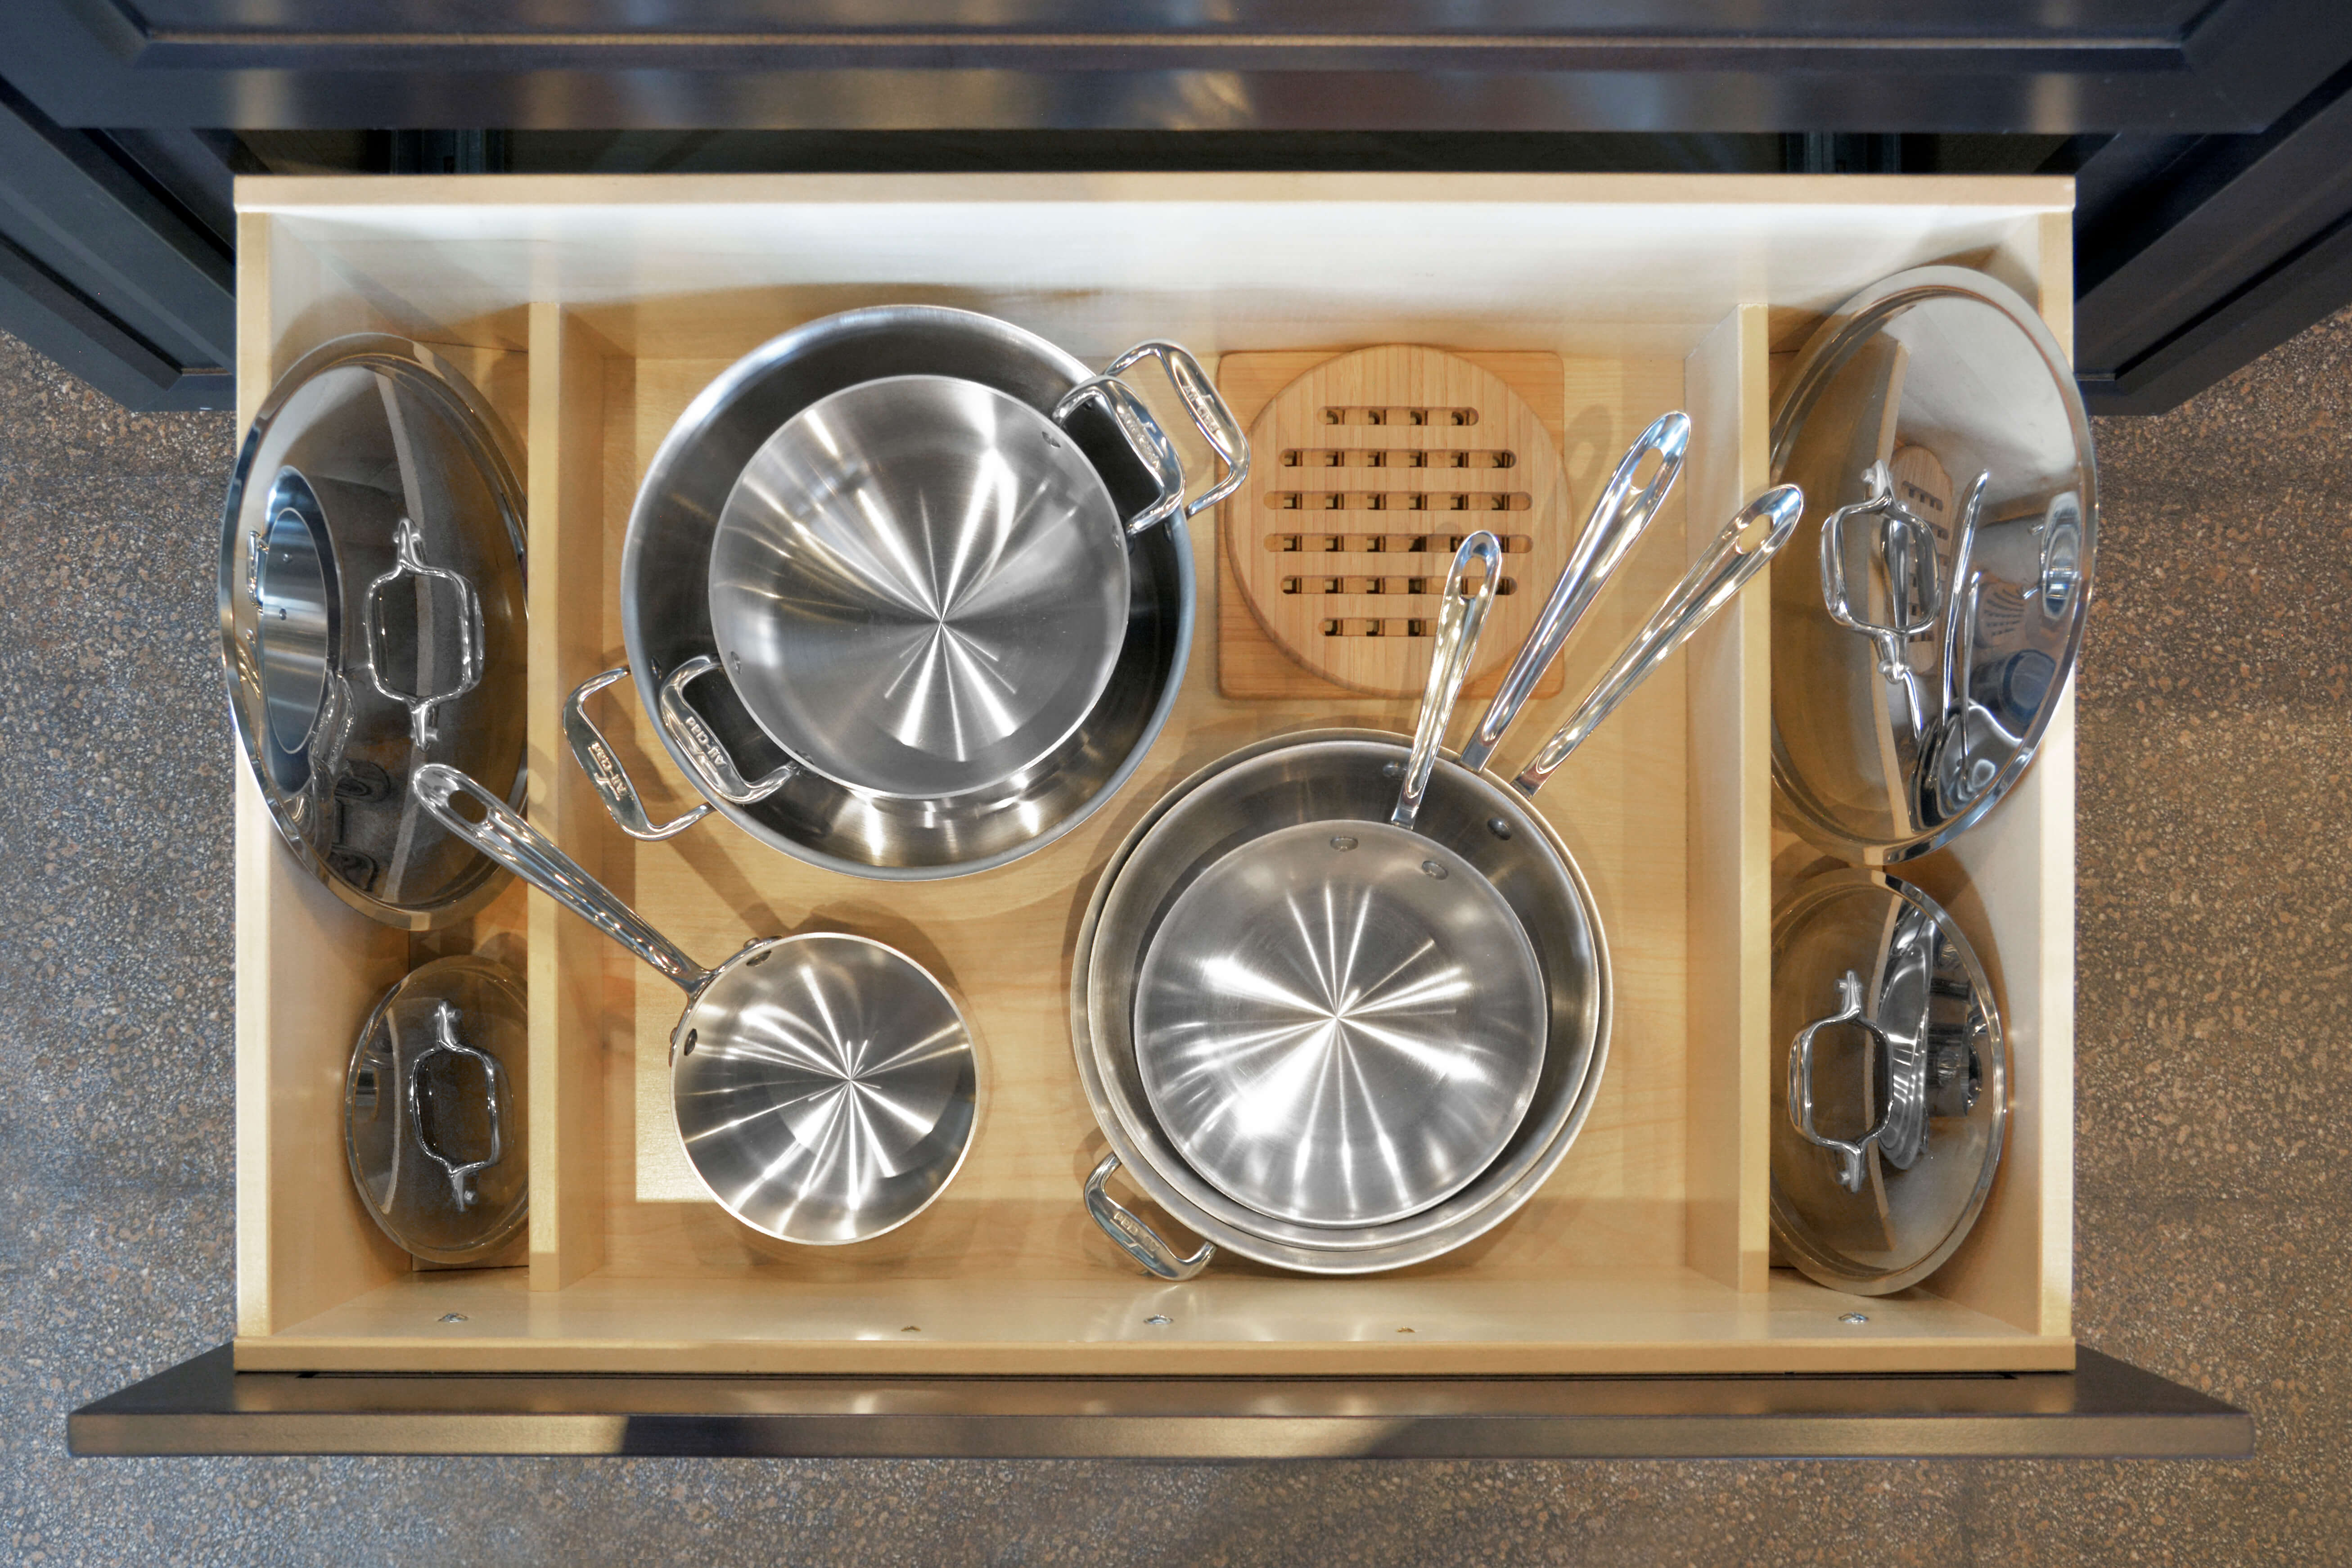 This pic gives a great idea of how to organize your kitchen lids